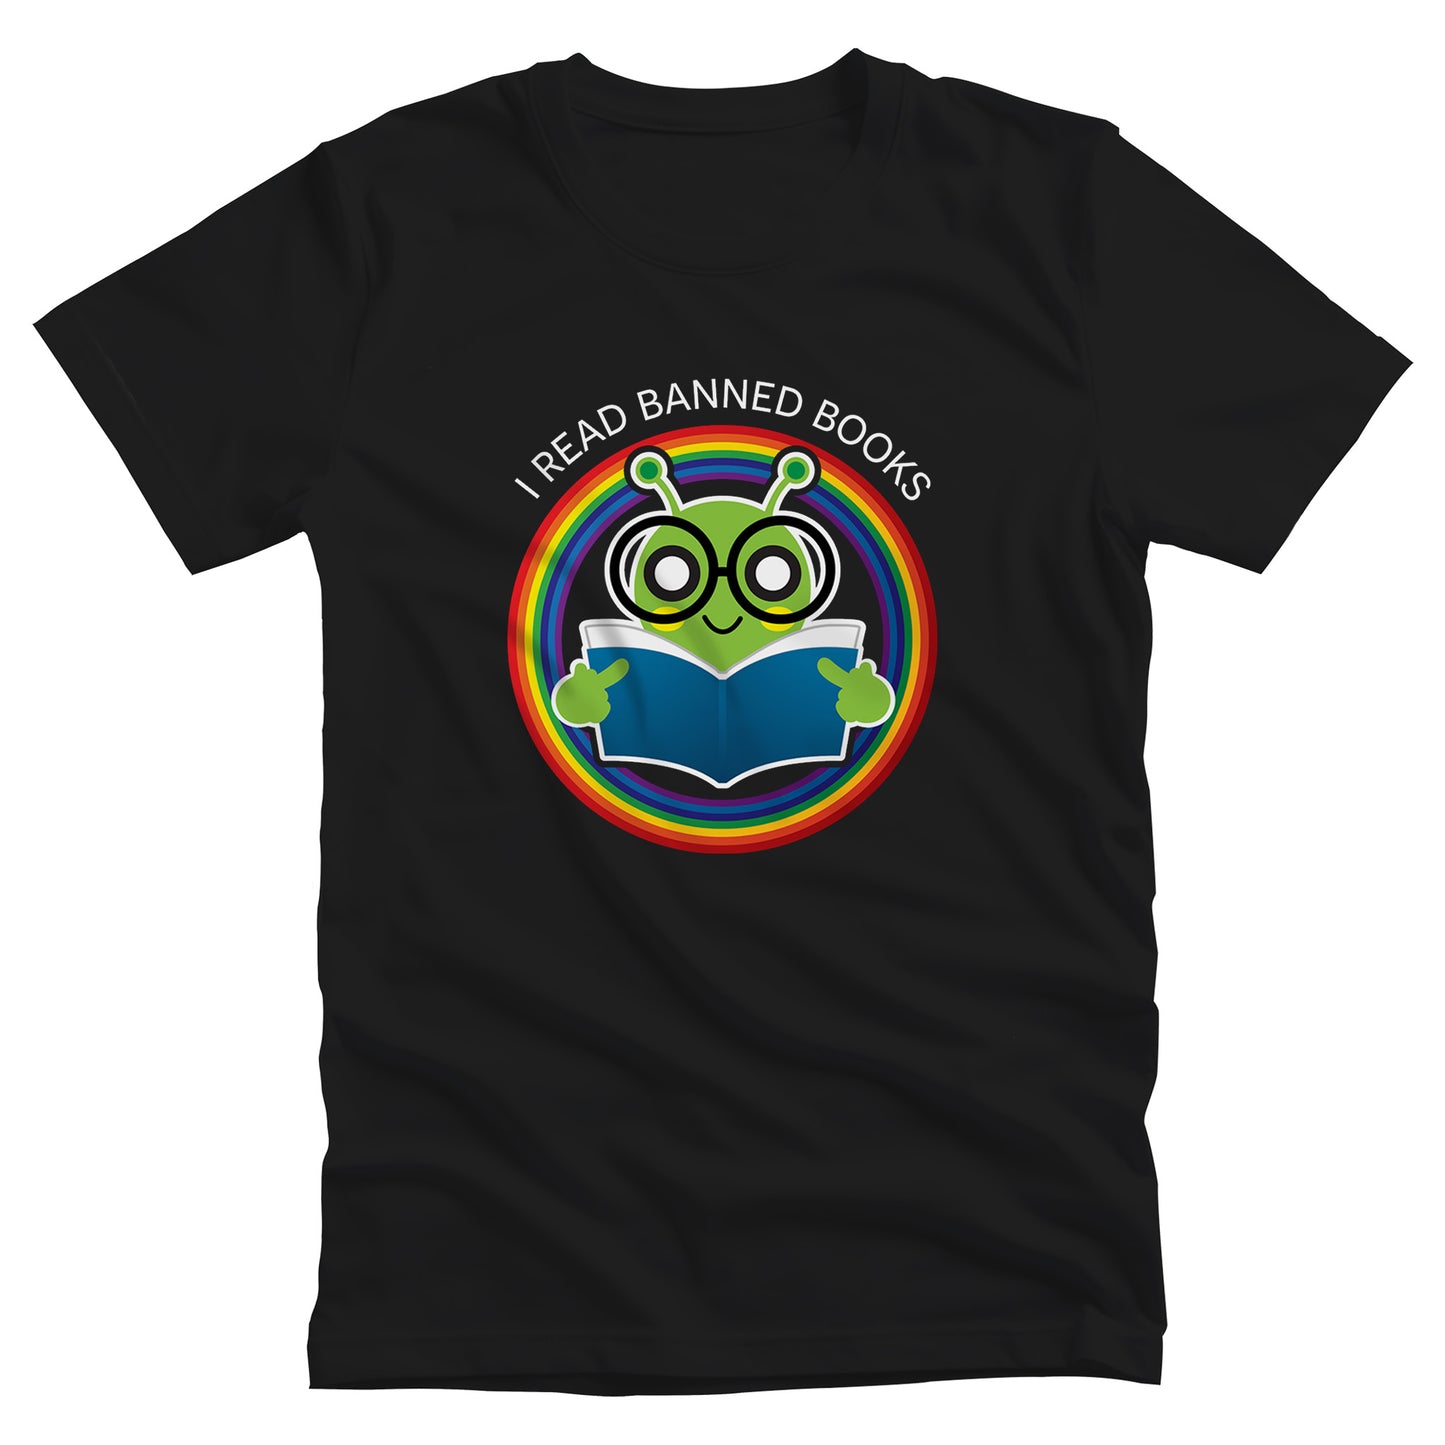 Black unisex t-shirt with a graphic of a bookworm with large eyeglasses reading a book. The bookworm is subtly holding up its middle fingers. The image is inside a circle that has rainbow colors. Arched over the top of the graphic are the words “I READ BANNED BOOKS.”